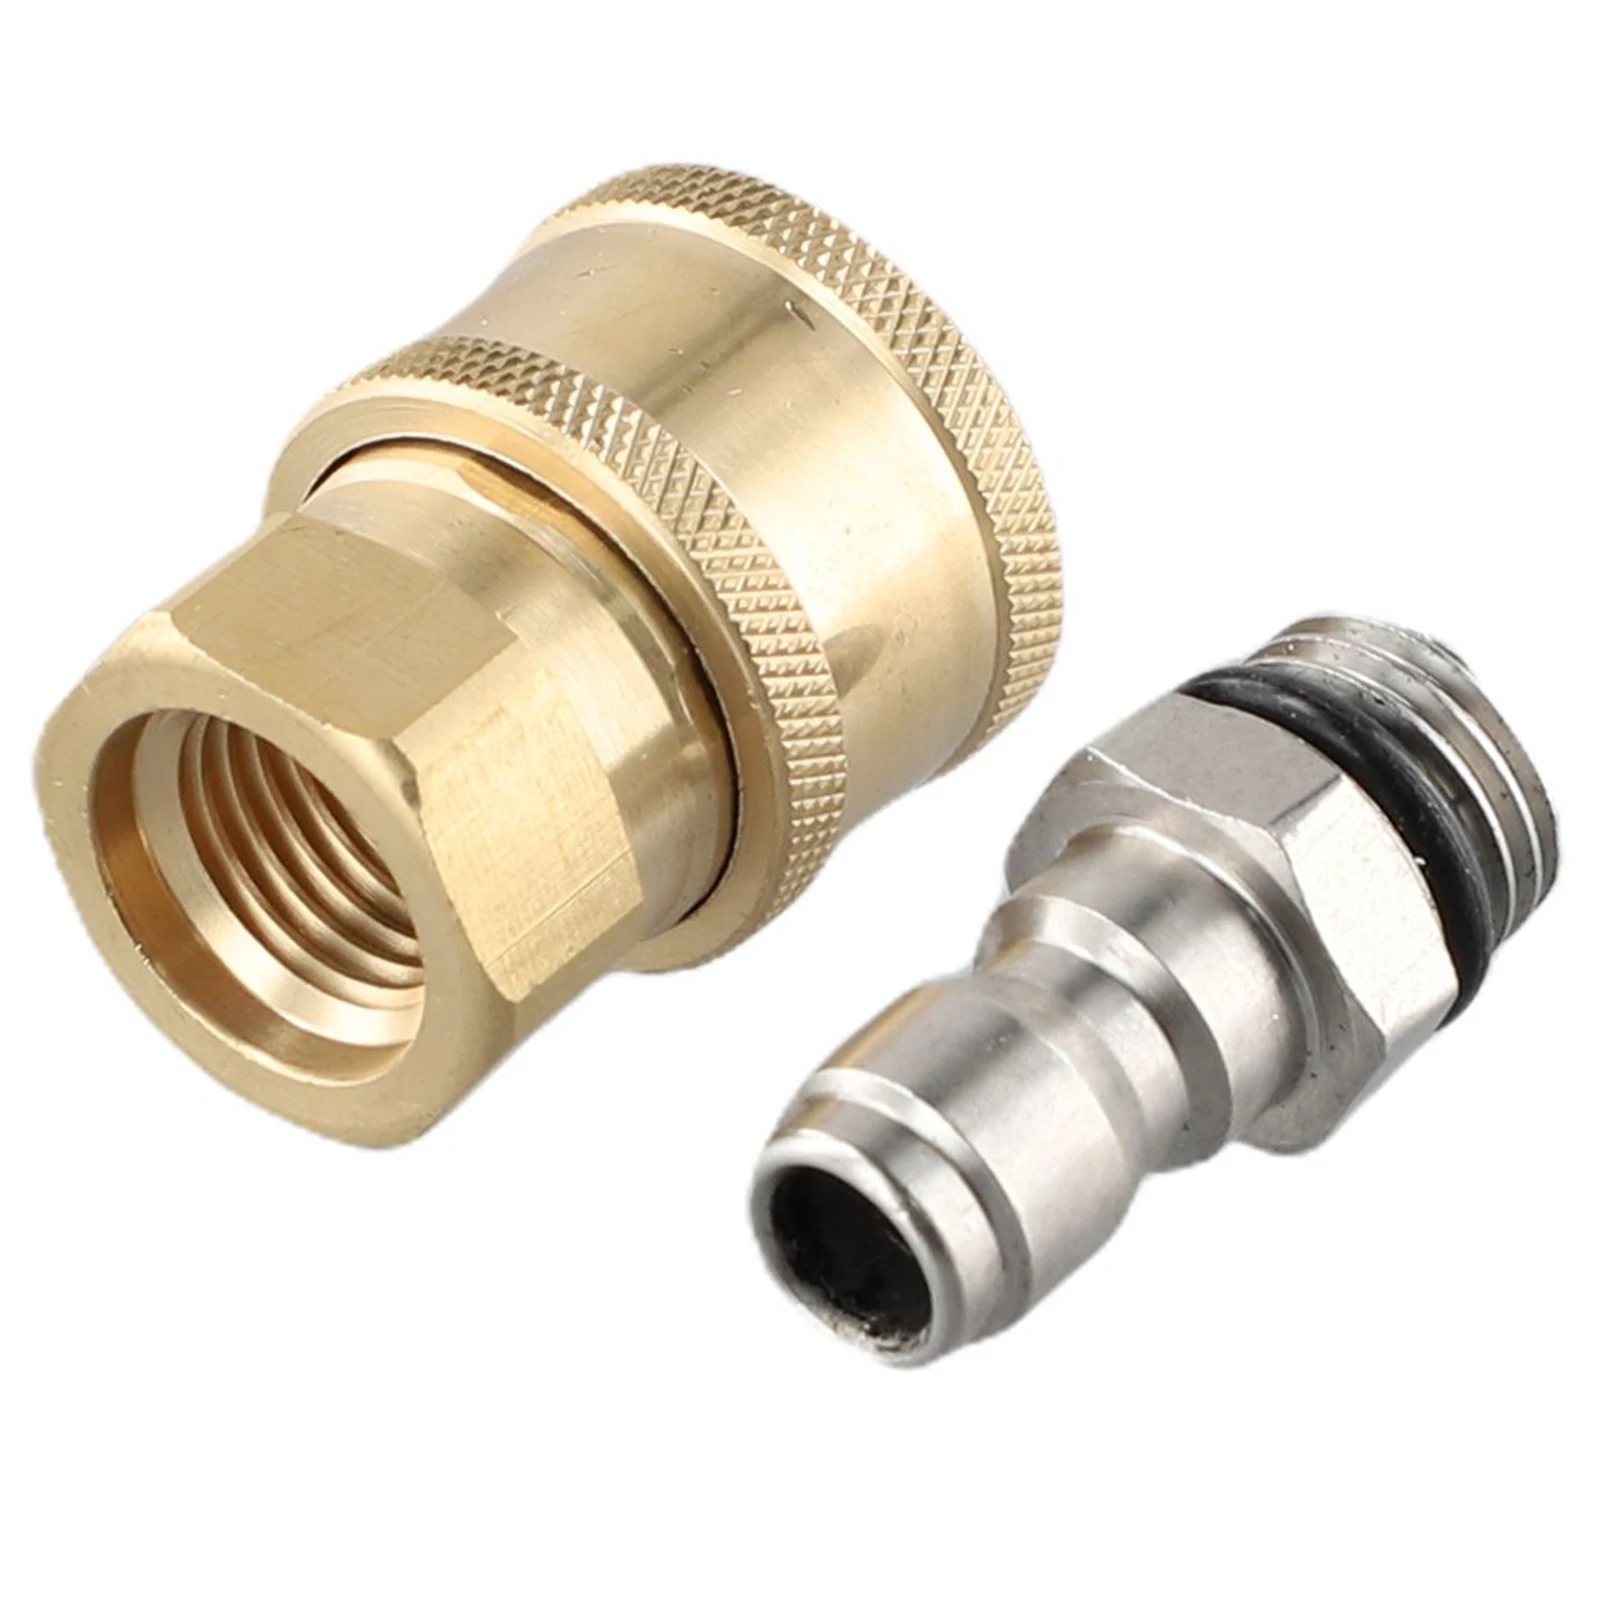 

1/4 Male M22/14 Female Connector Brass Garden Parts Plug Quick Release Replacement Adapter Pair Stainless Steel